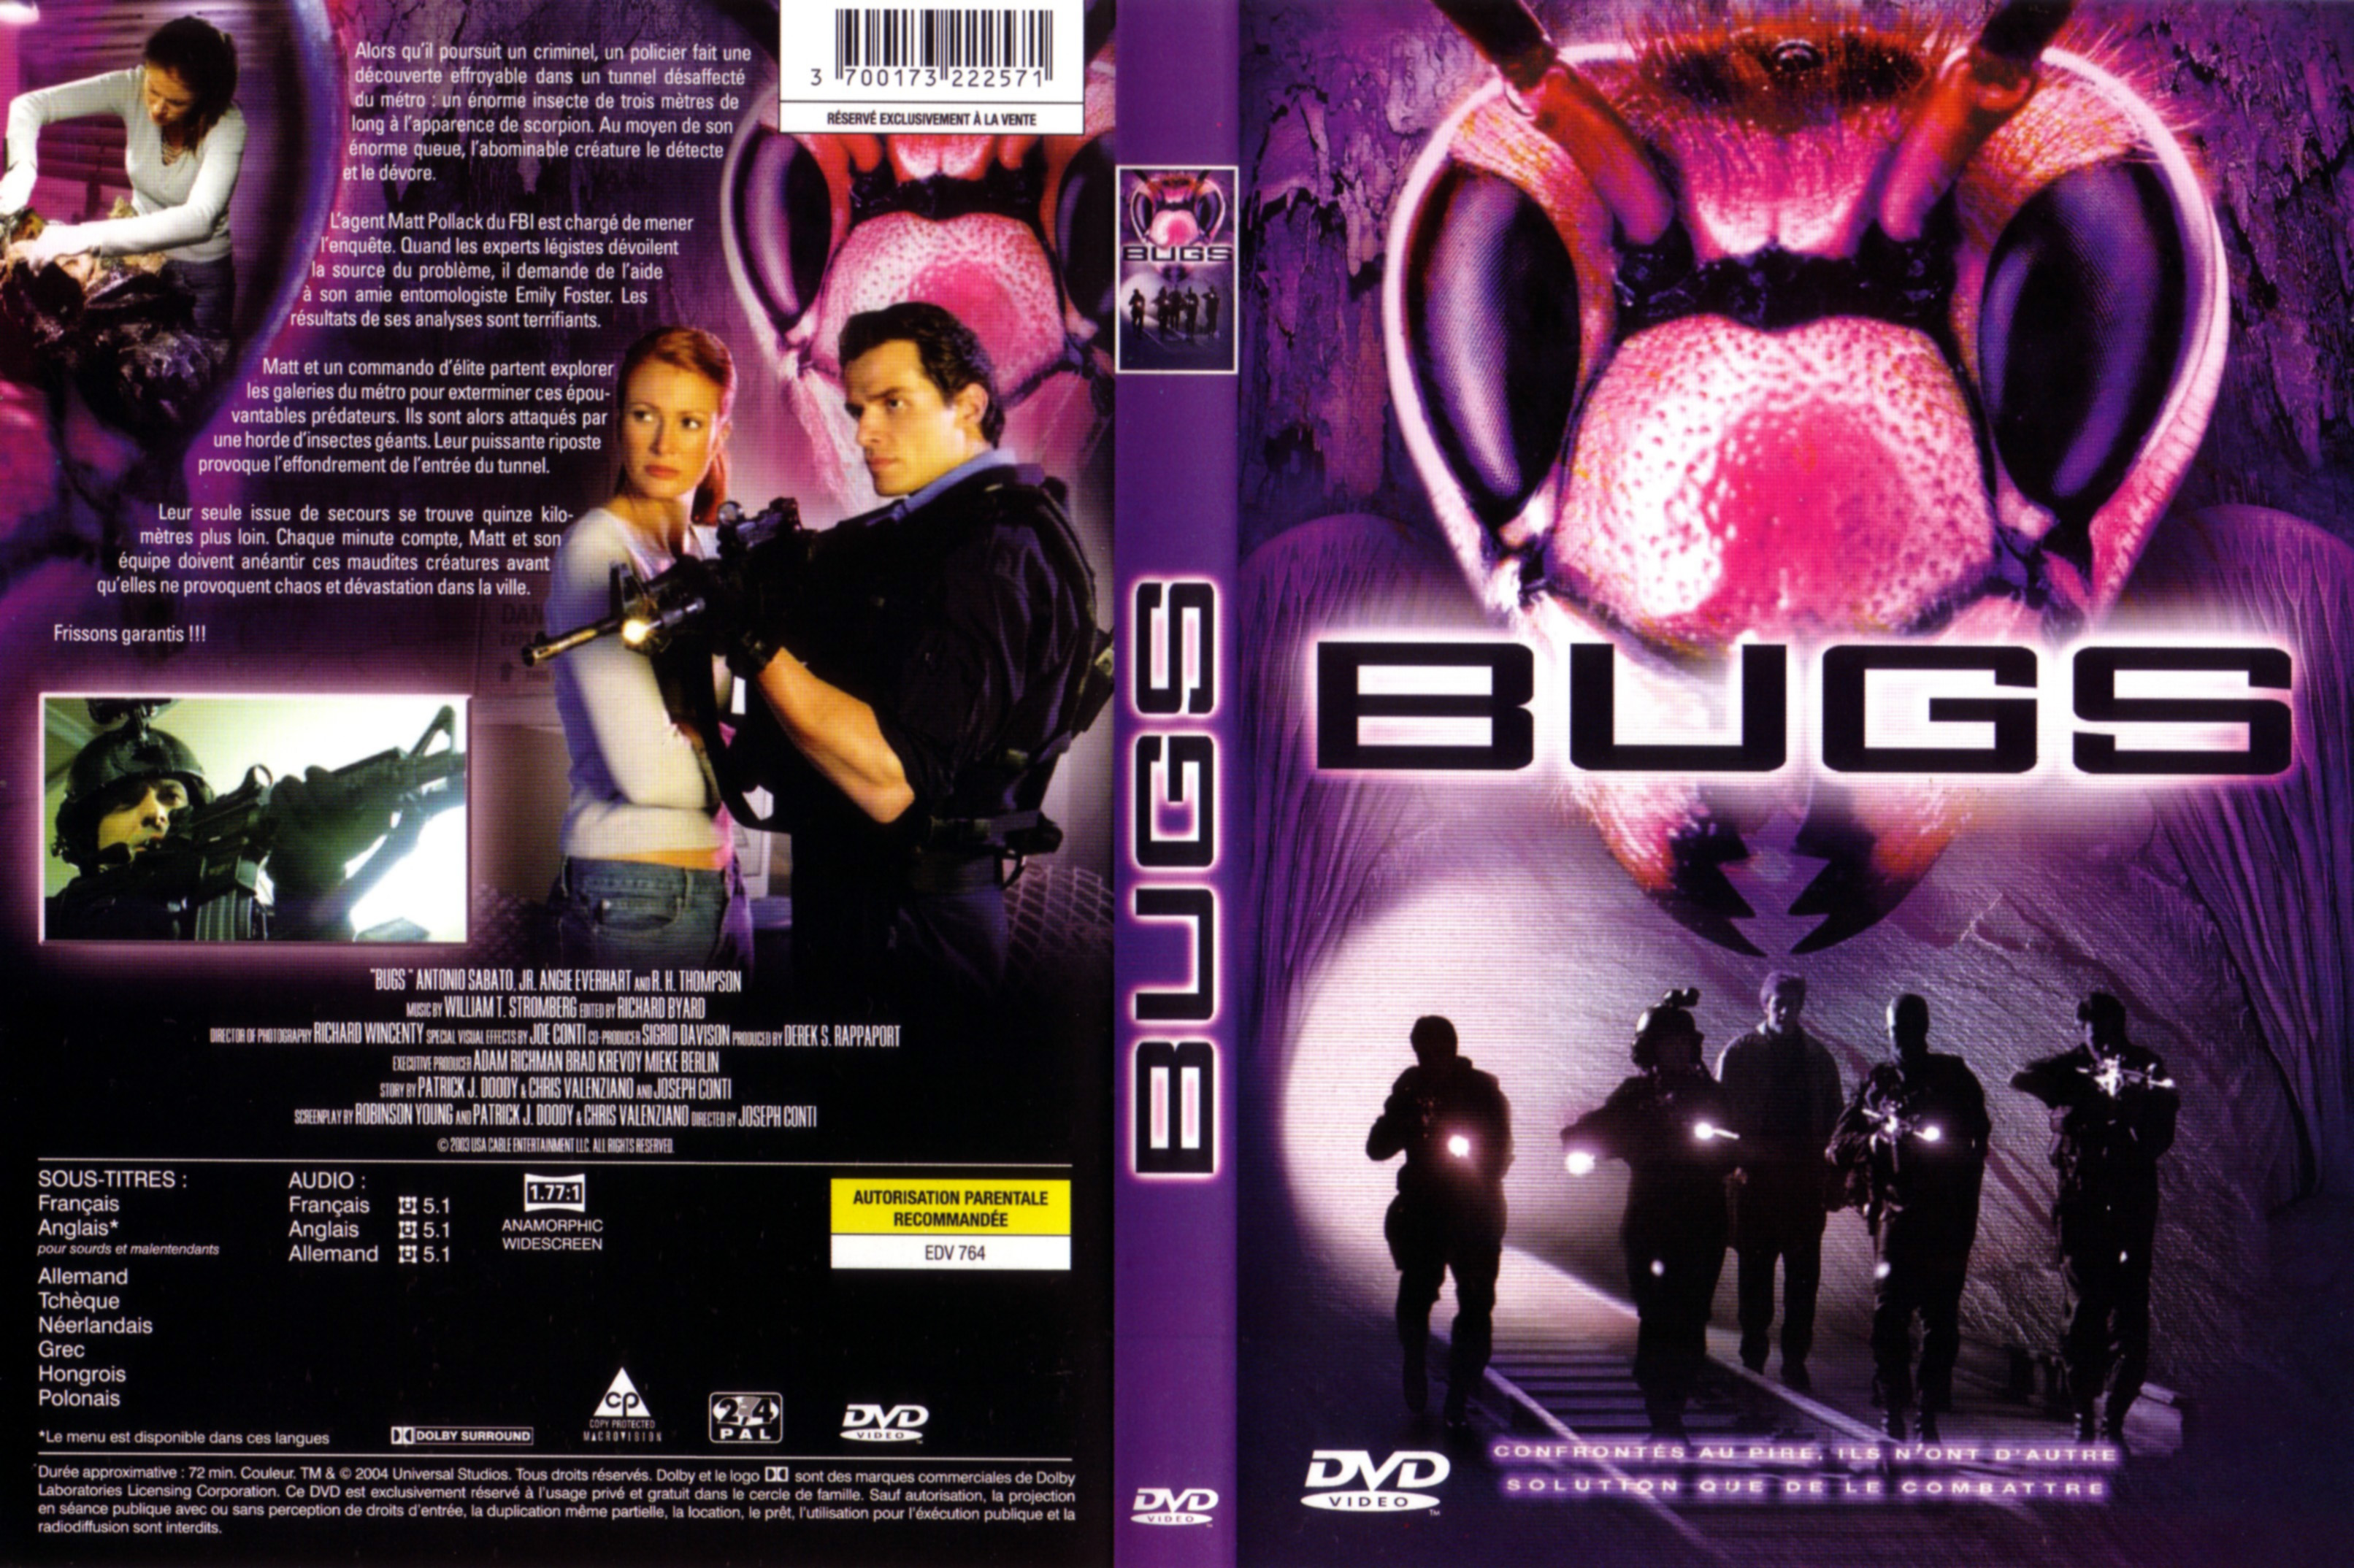 Jaquette DVD Bugs